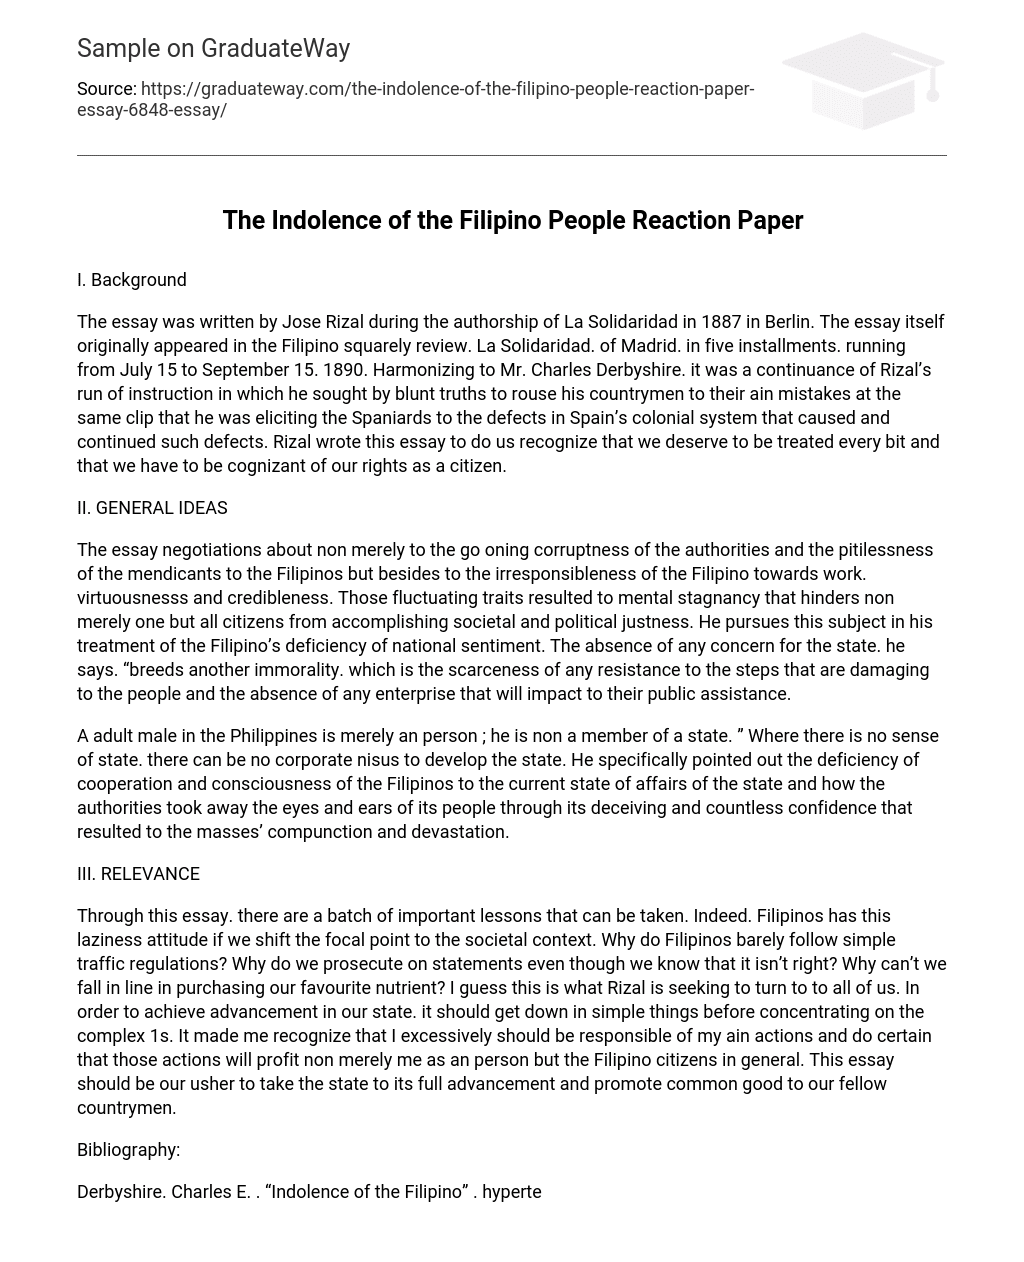 The Indolence of the Filipino People Reaction Paper Analysis